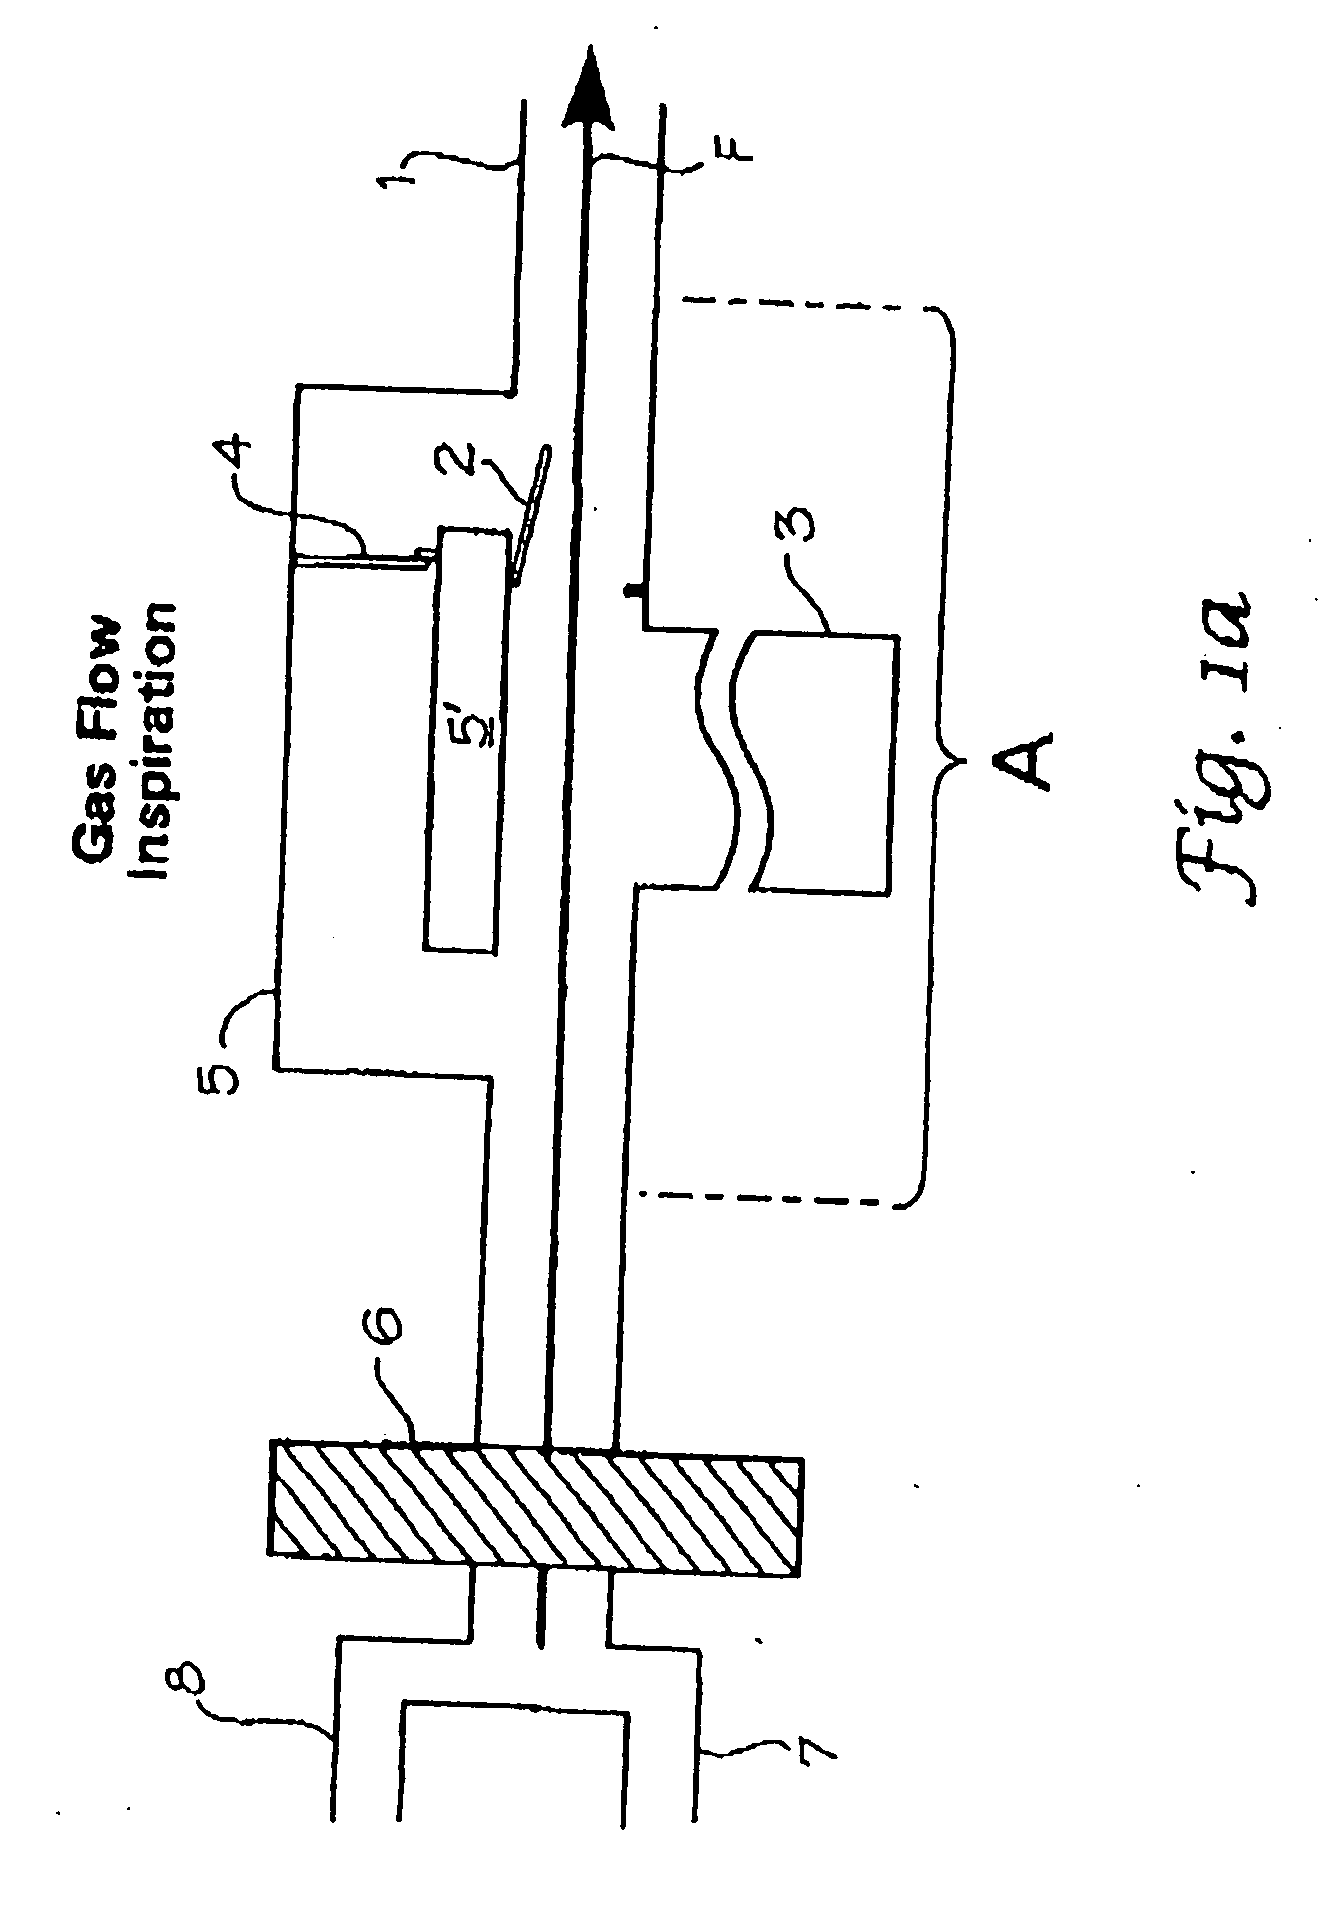 Device for influencing gas flows